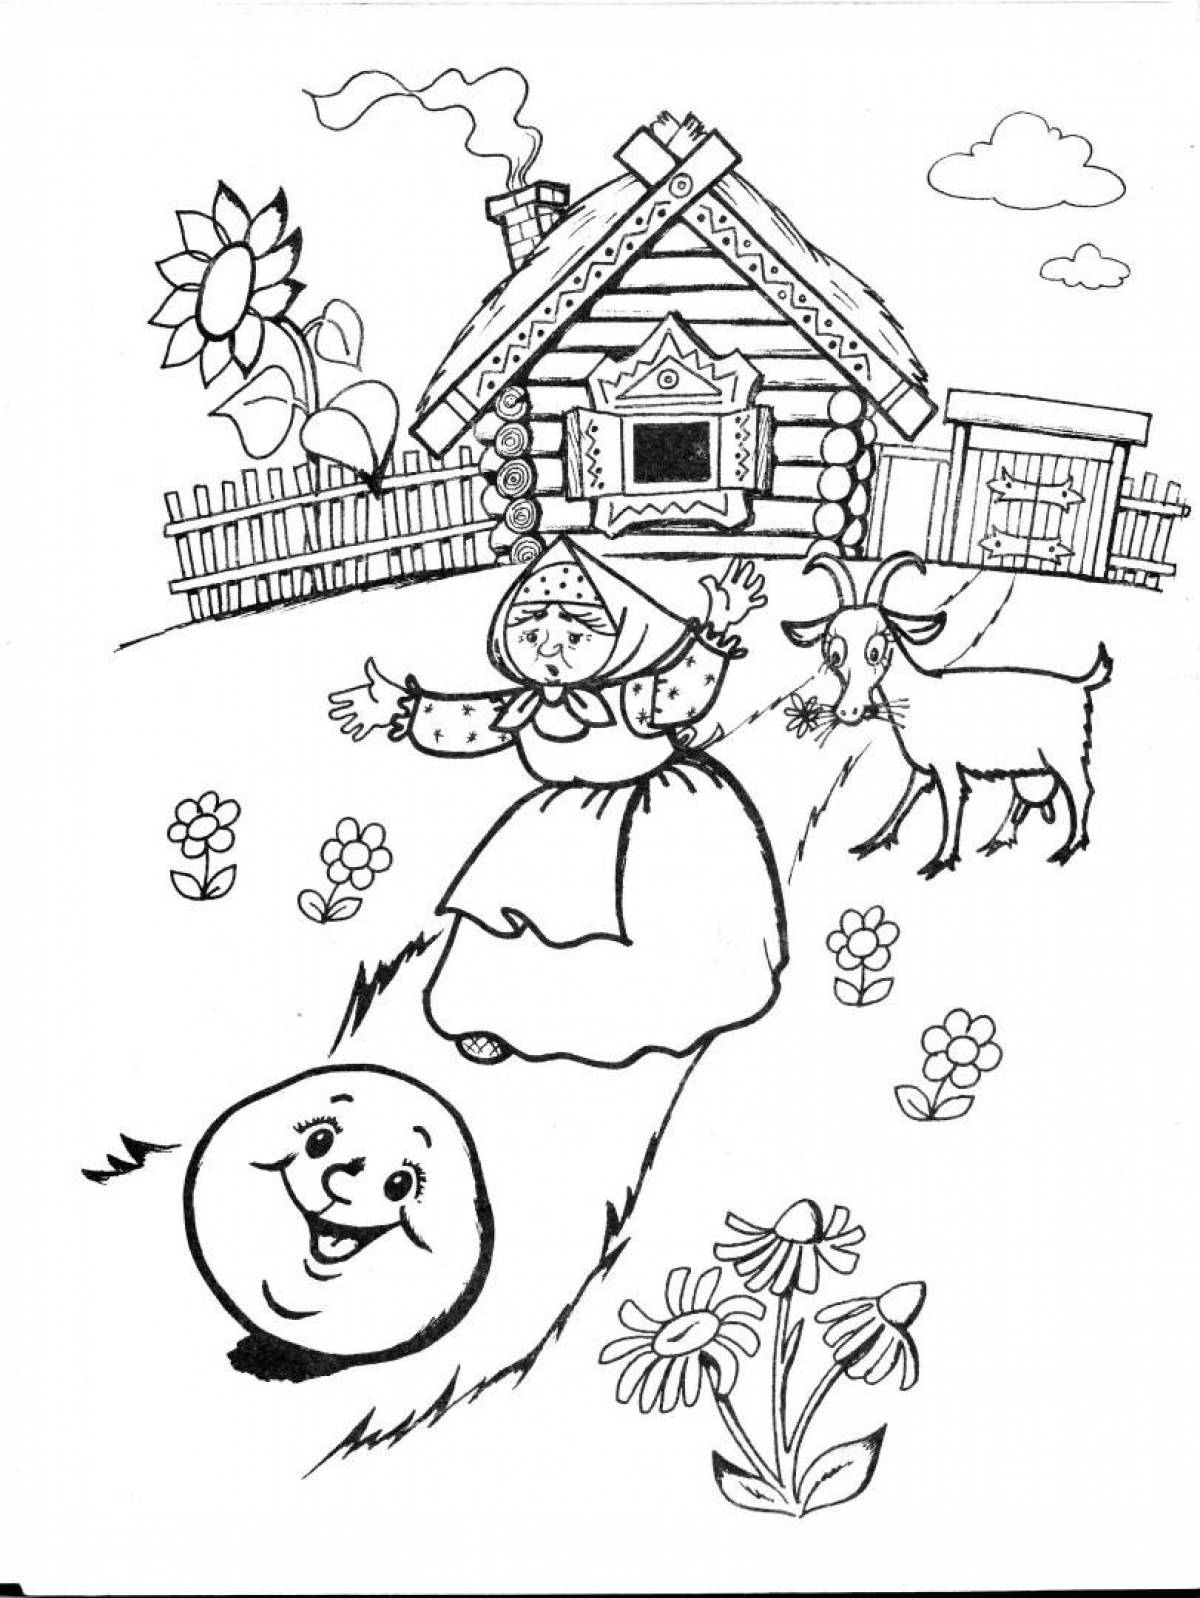 Adorable kolobok coloring book for the little ones